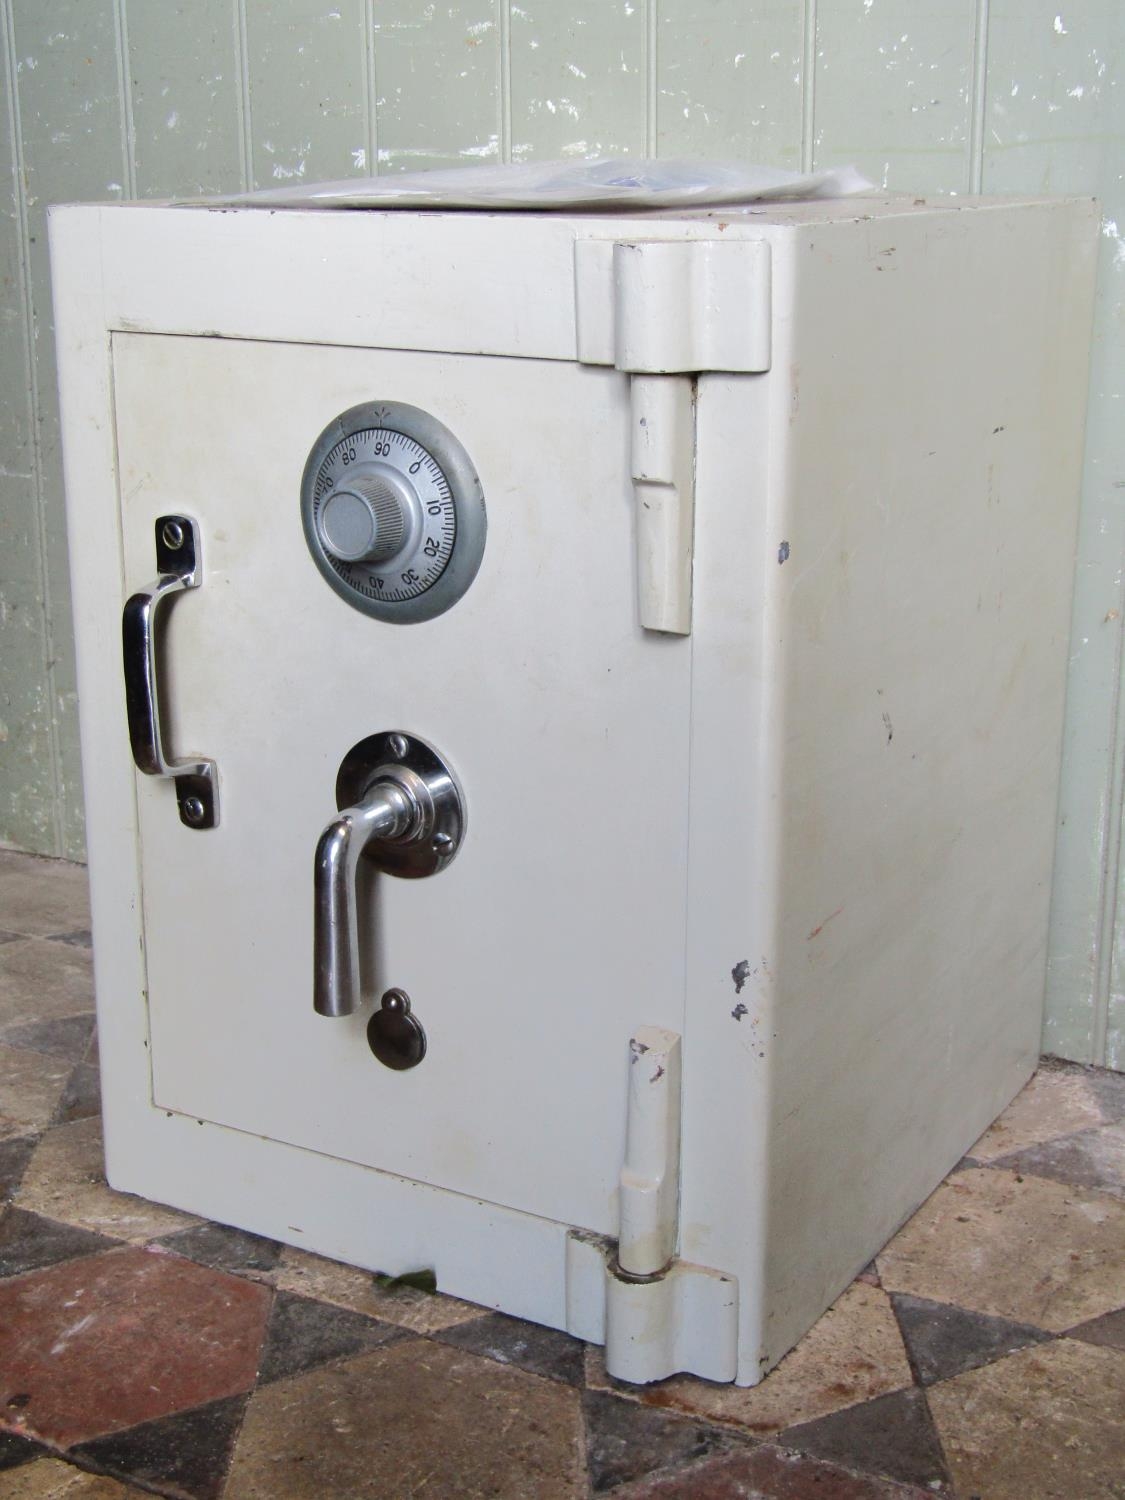 A combination safe and key entry enclosed by single door, possibly by Chubb, together with